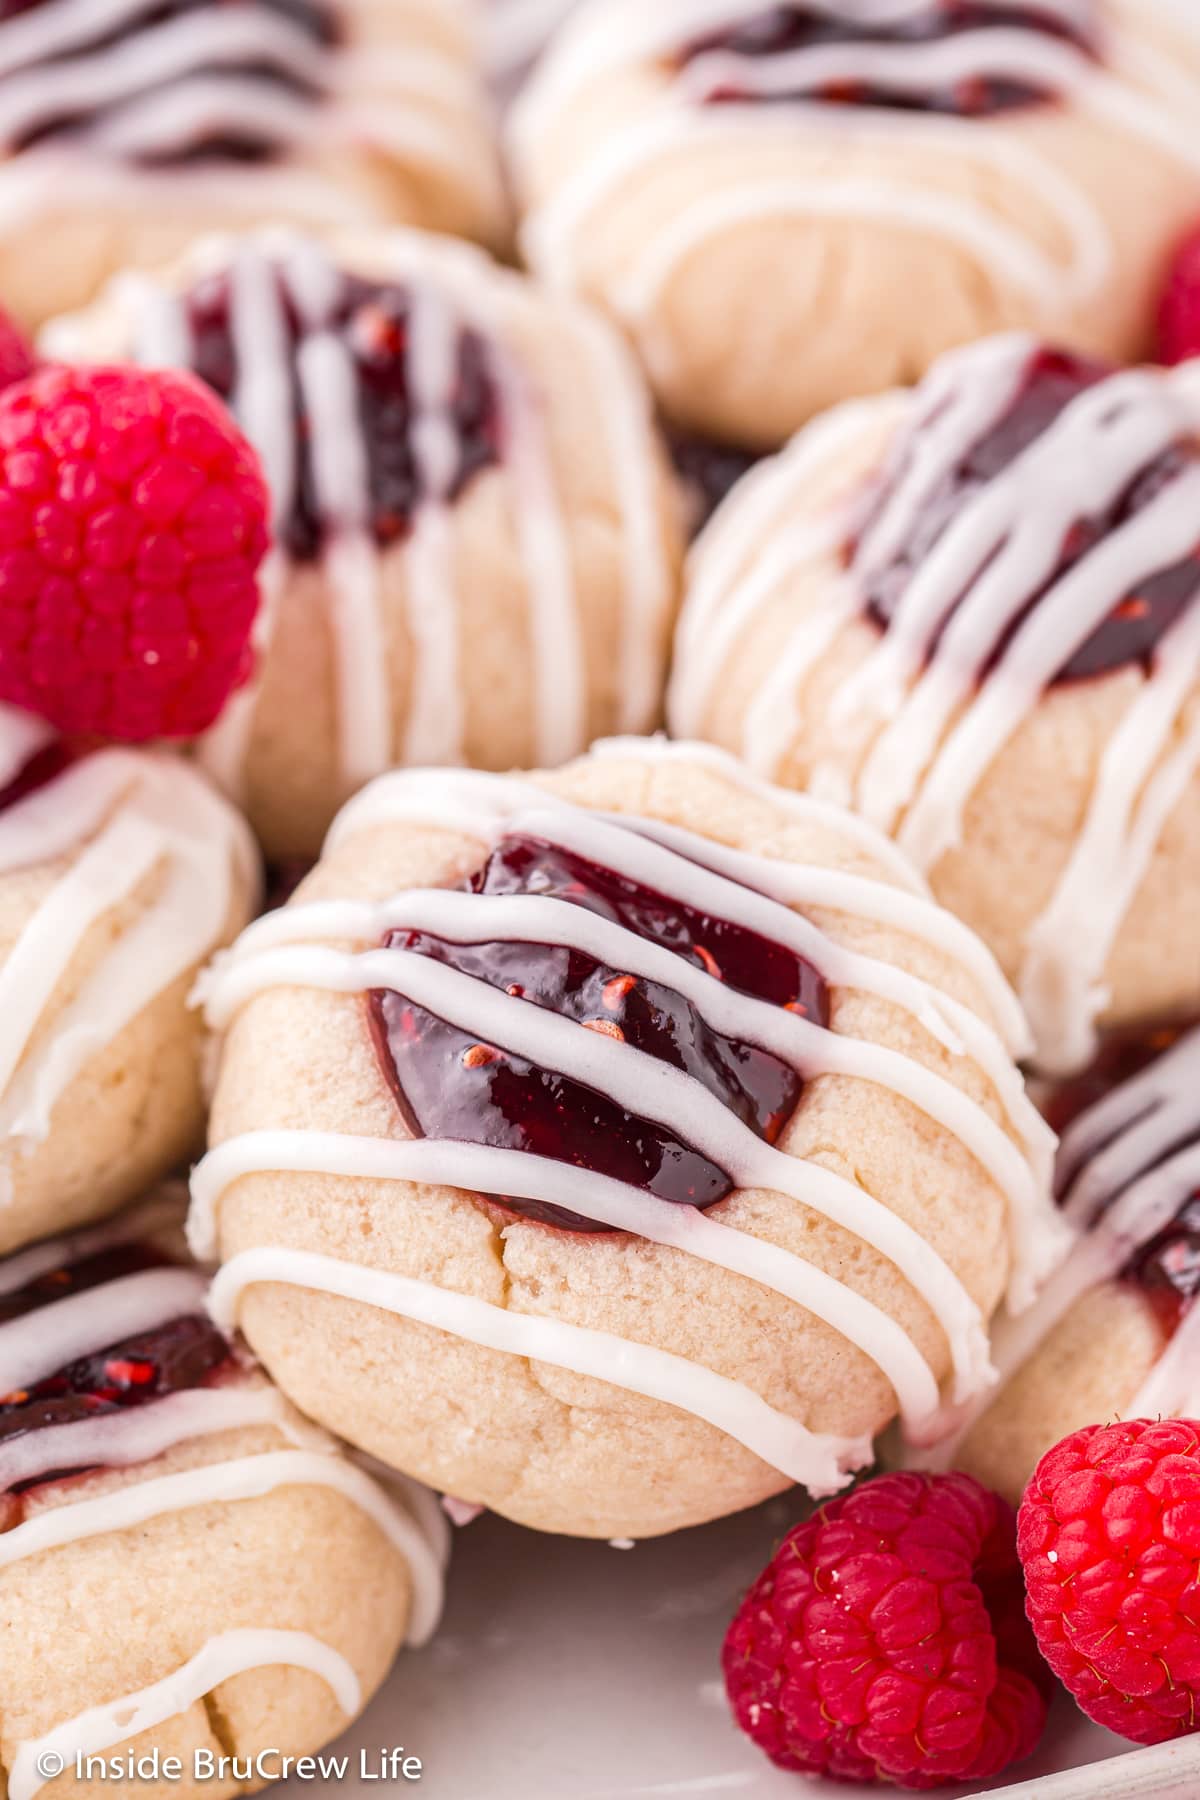 Jelly thumbprint cookies drizzled with glaze on a tray.